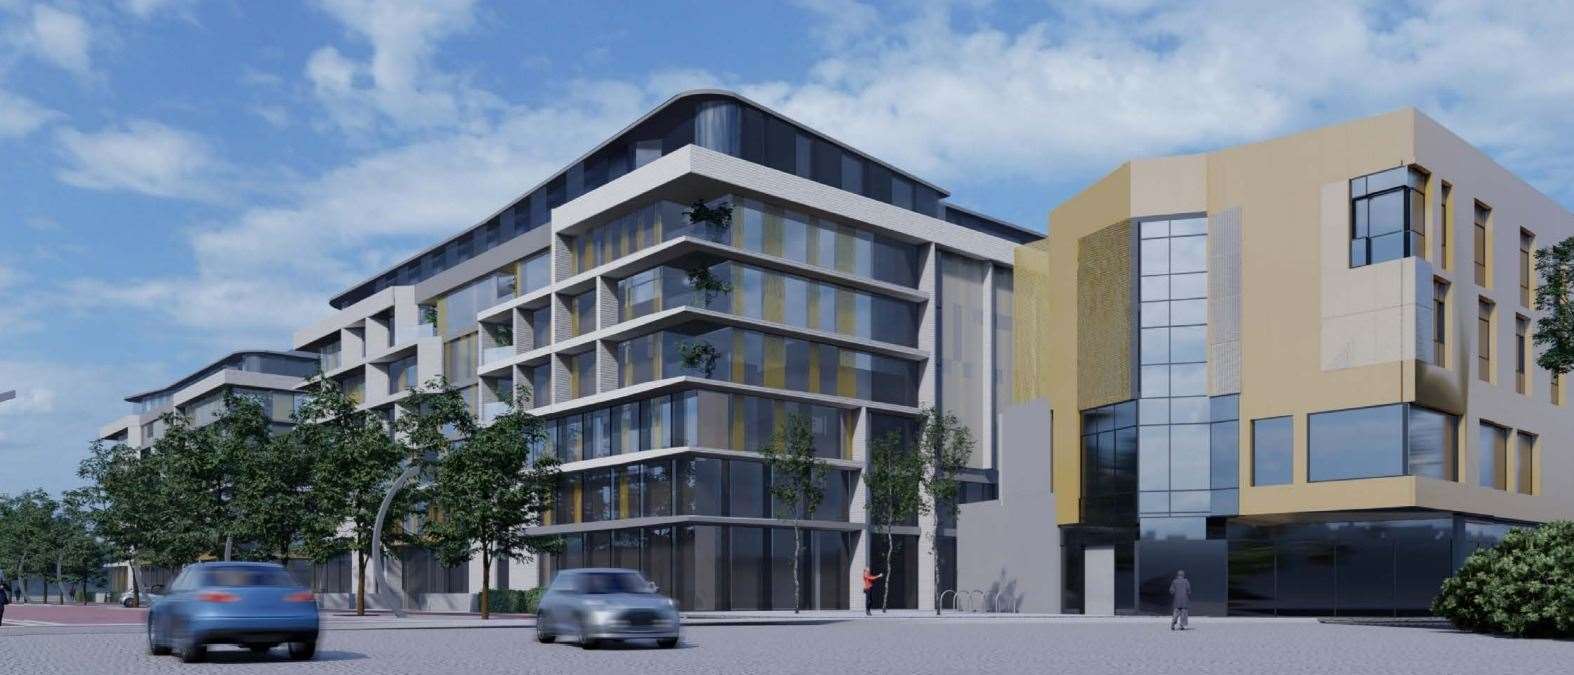 How the flats at Elwick Place could look